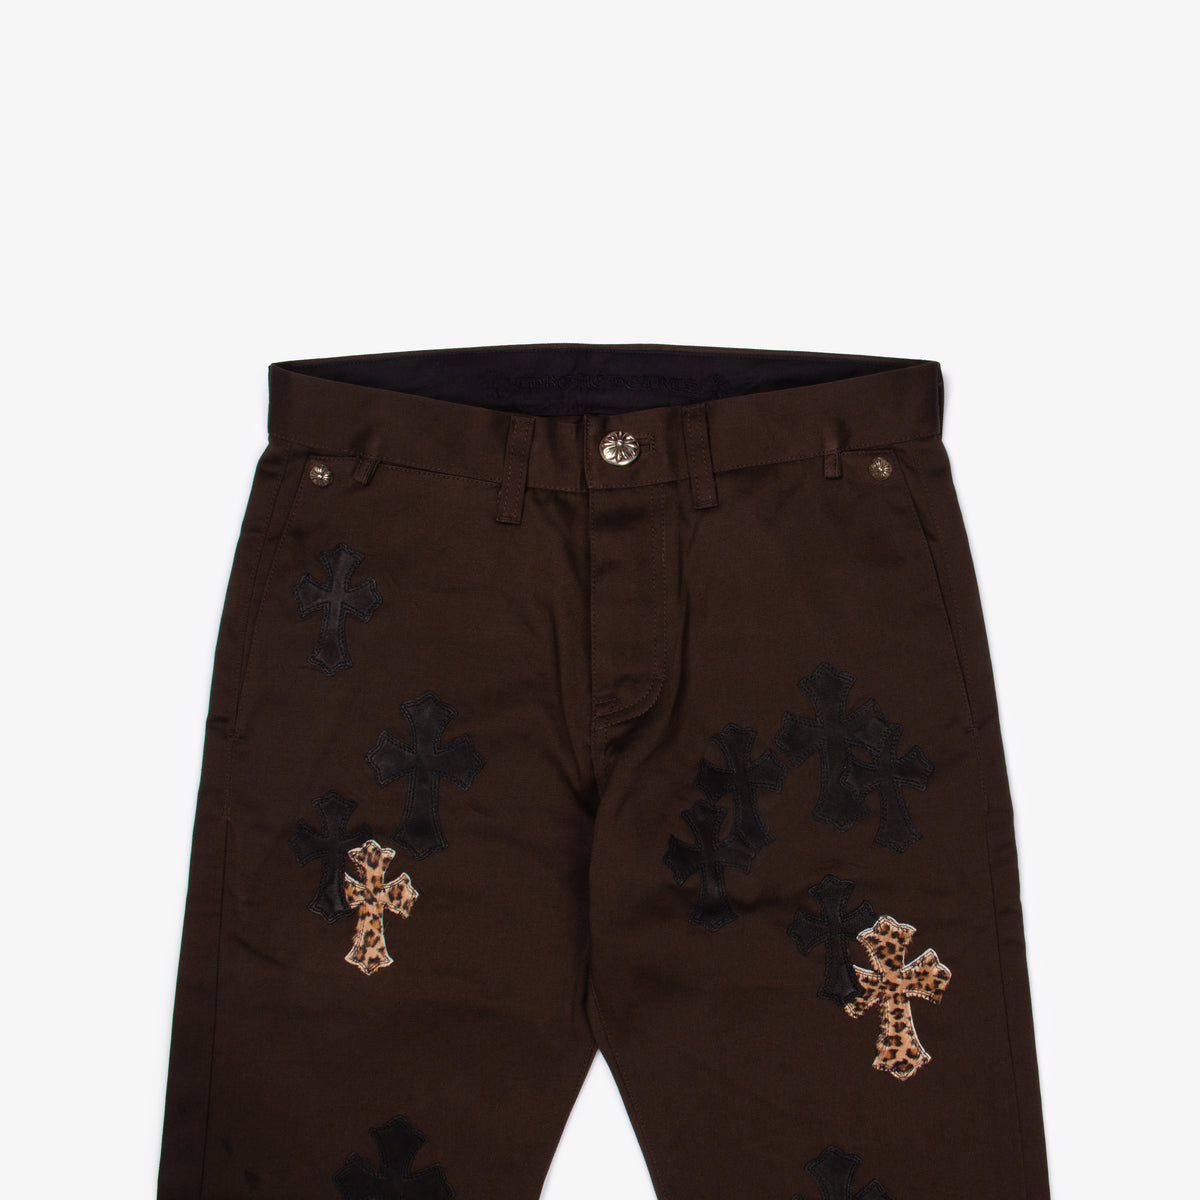 40 MIXED CAMO CROSS PATCH CHINO – OBTAIND